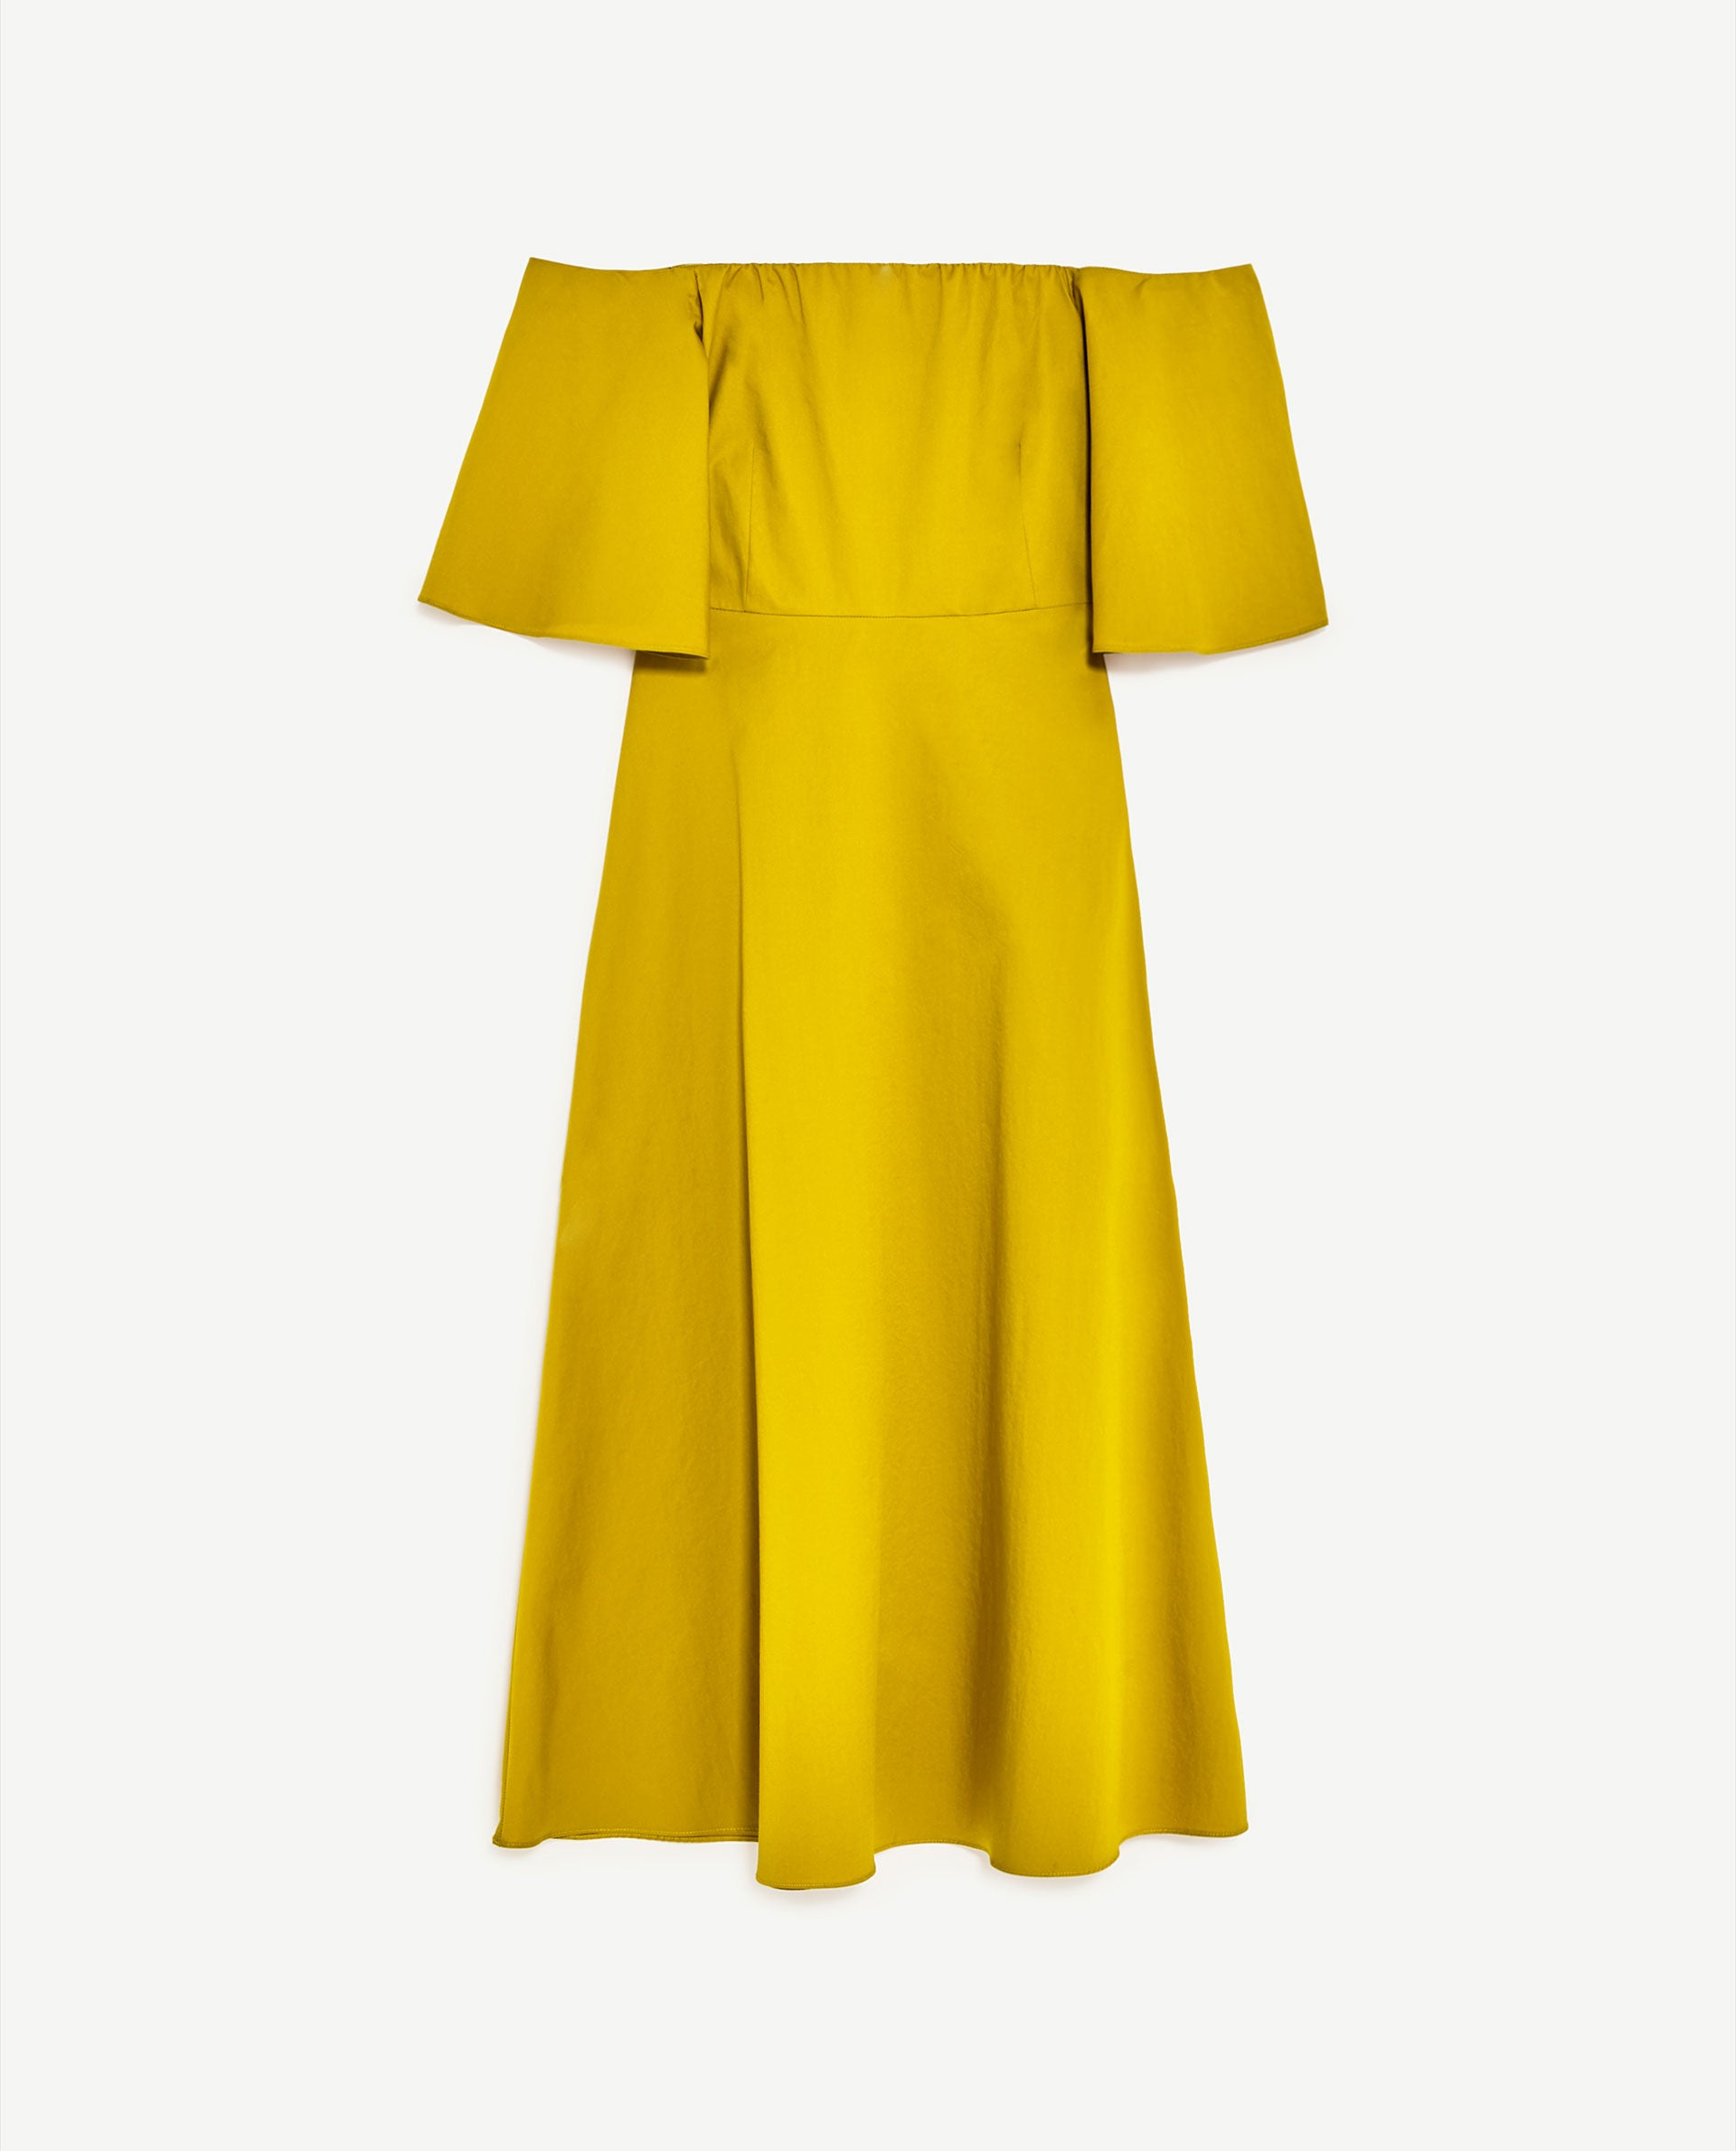 The 11 Dresses We Have Our Eye On Now That Spring is On Its Way